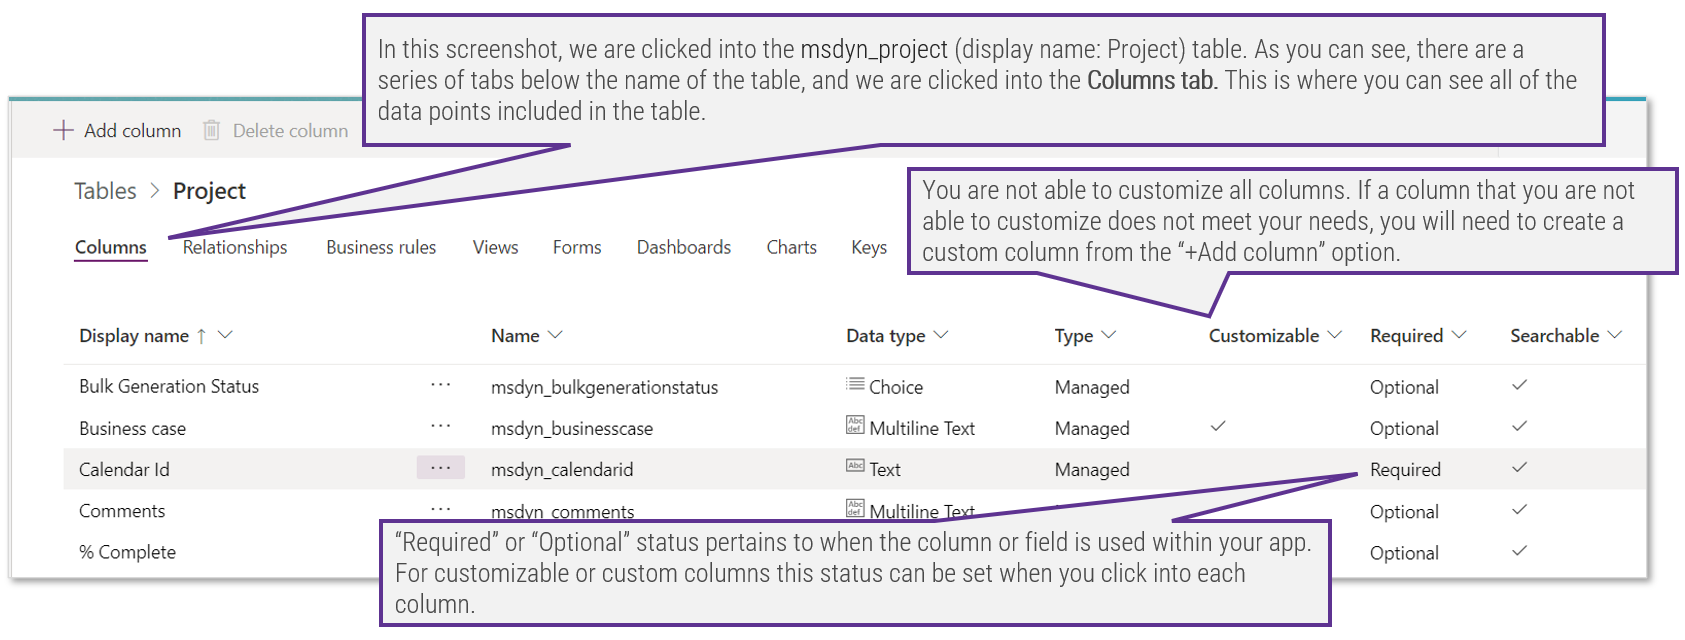 Screenshot of the 'Columns' tab, open in the 'msdyn_project table' in 'Power Apps'.